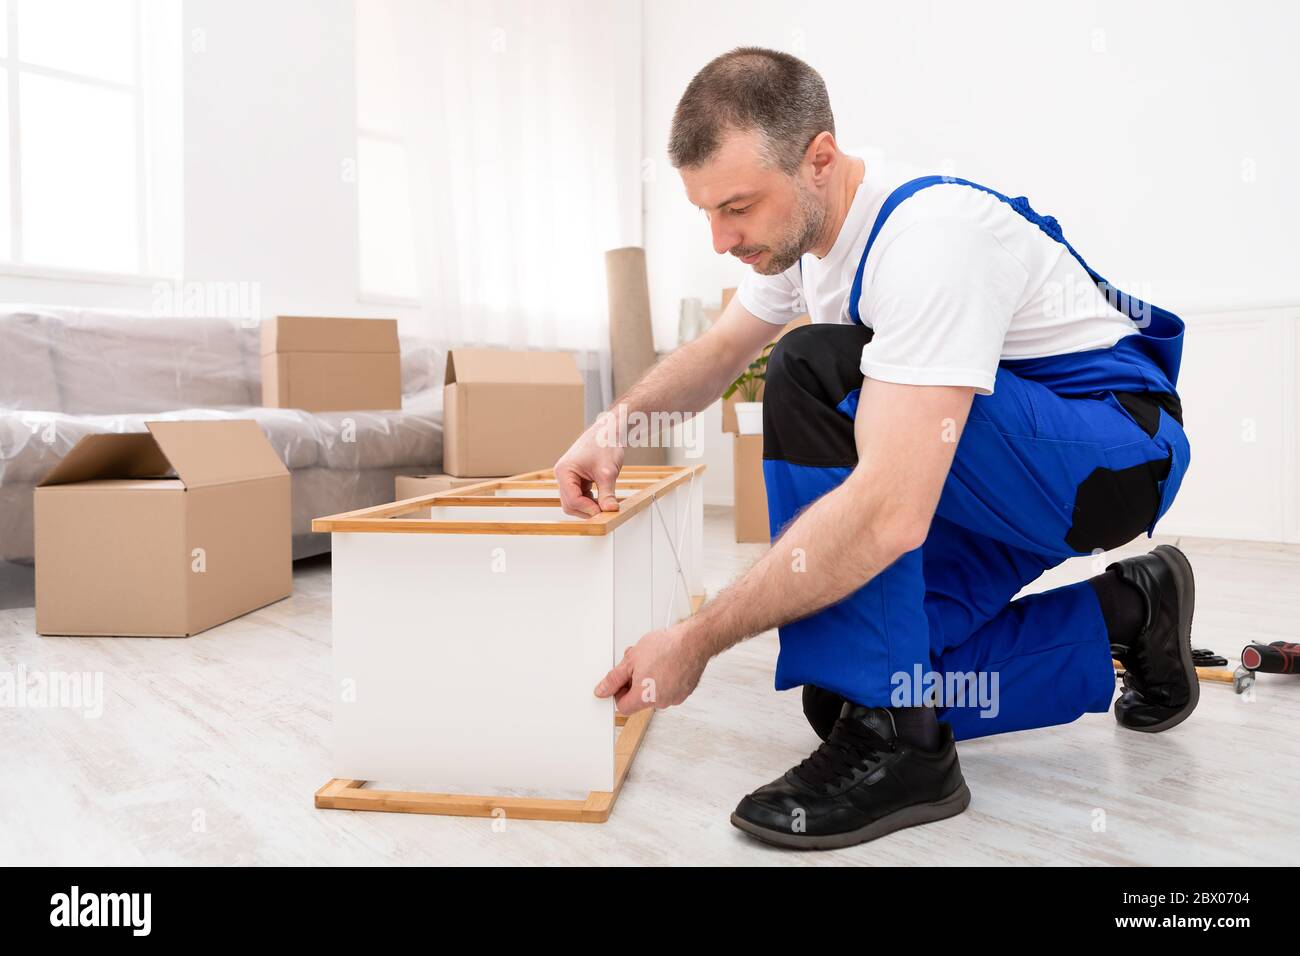 Repairman Assembling Furniture In Flat After Relocation, Wearing Blue Coverall Stock Photo